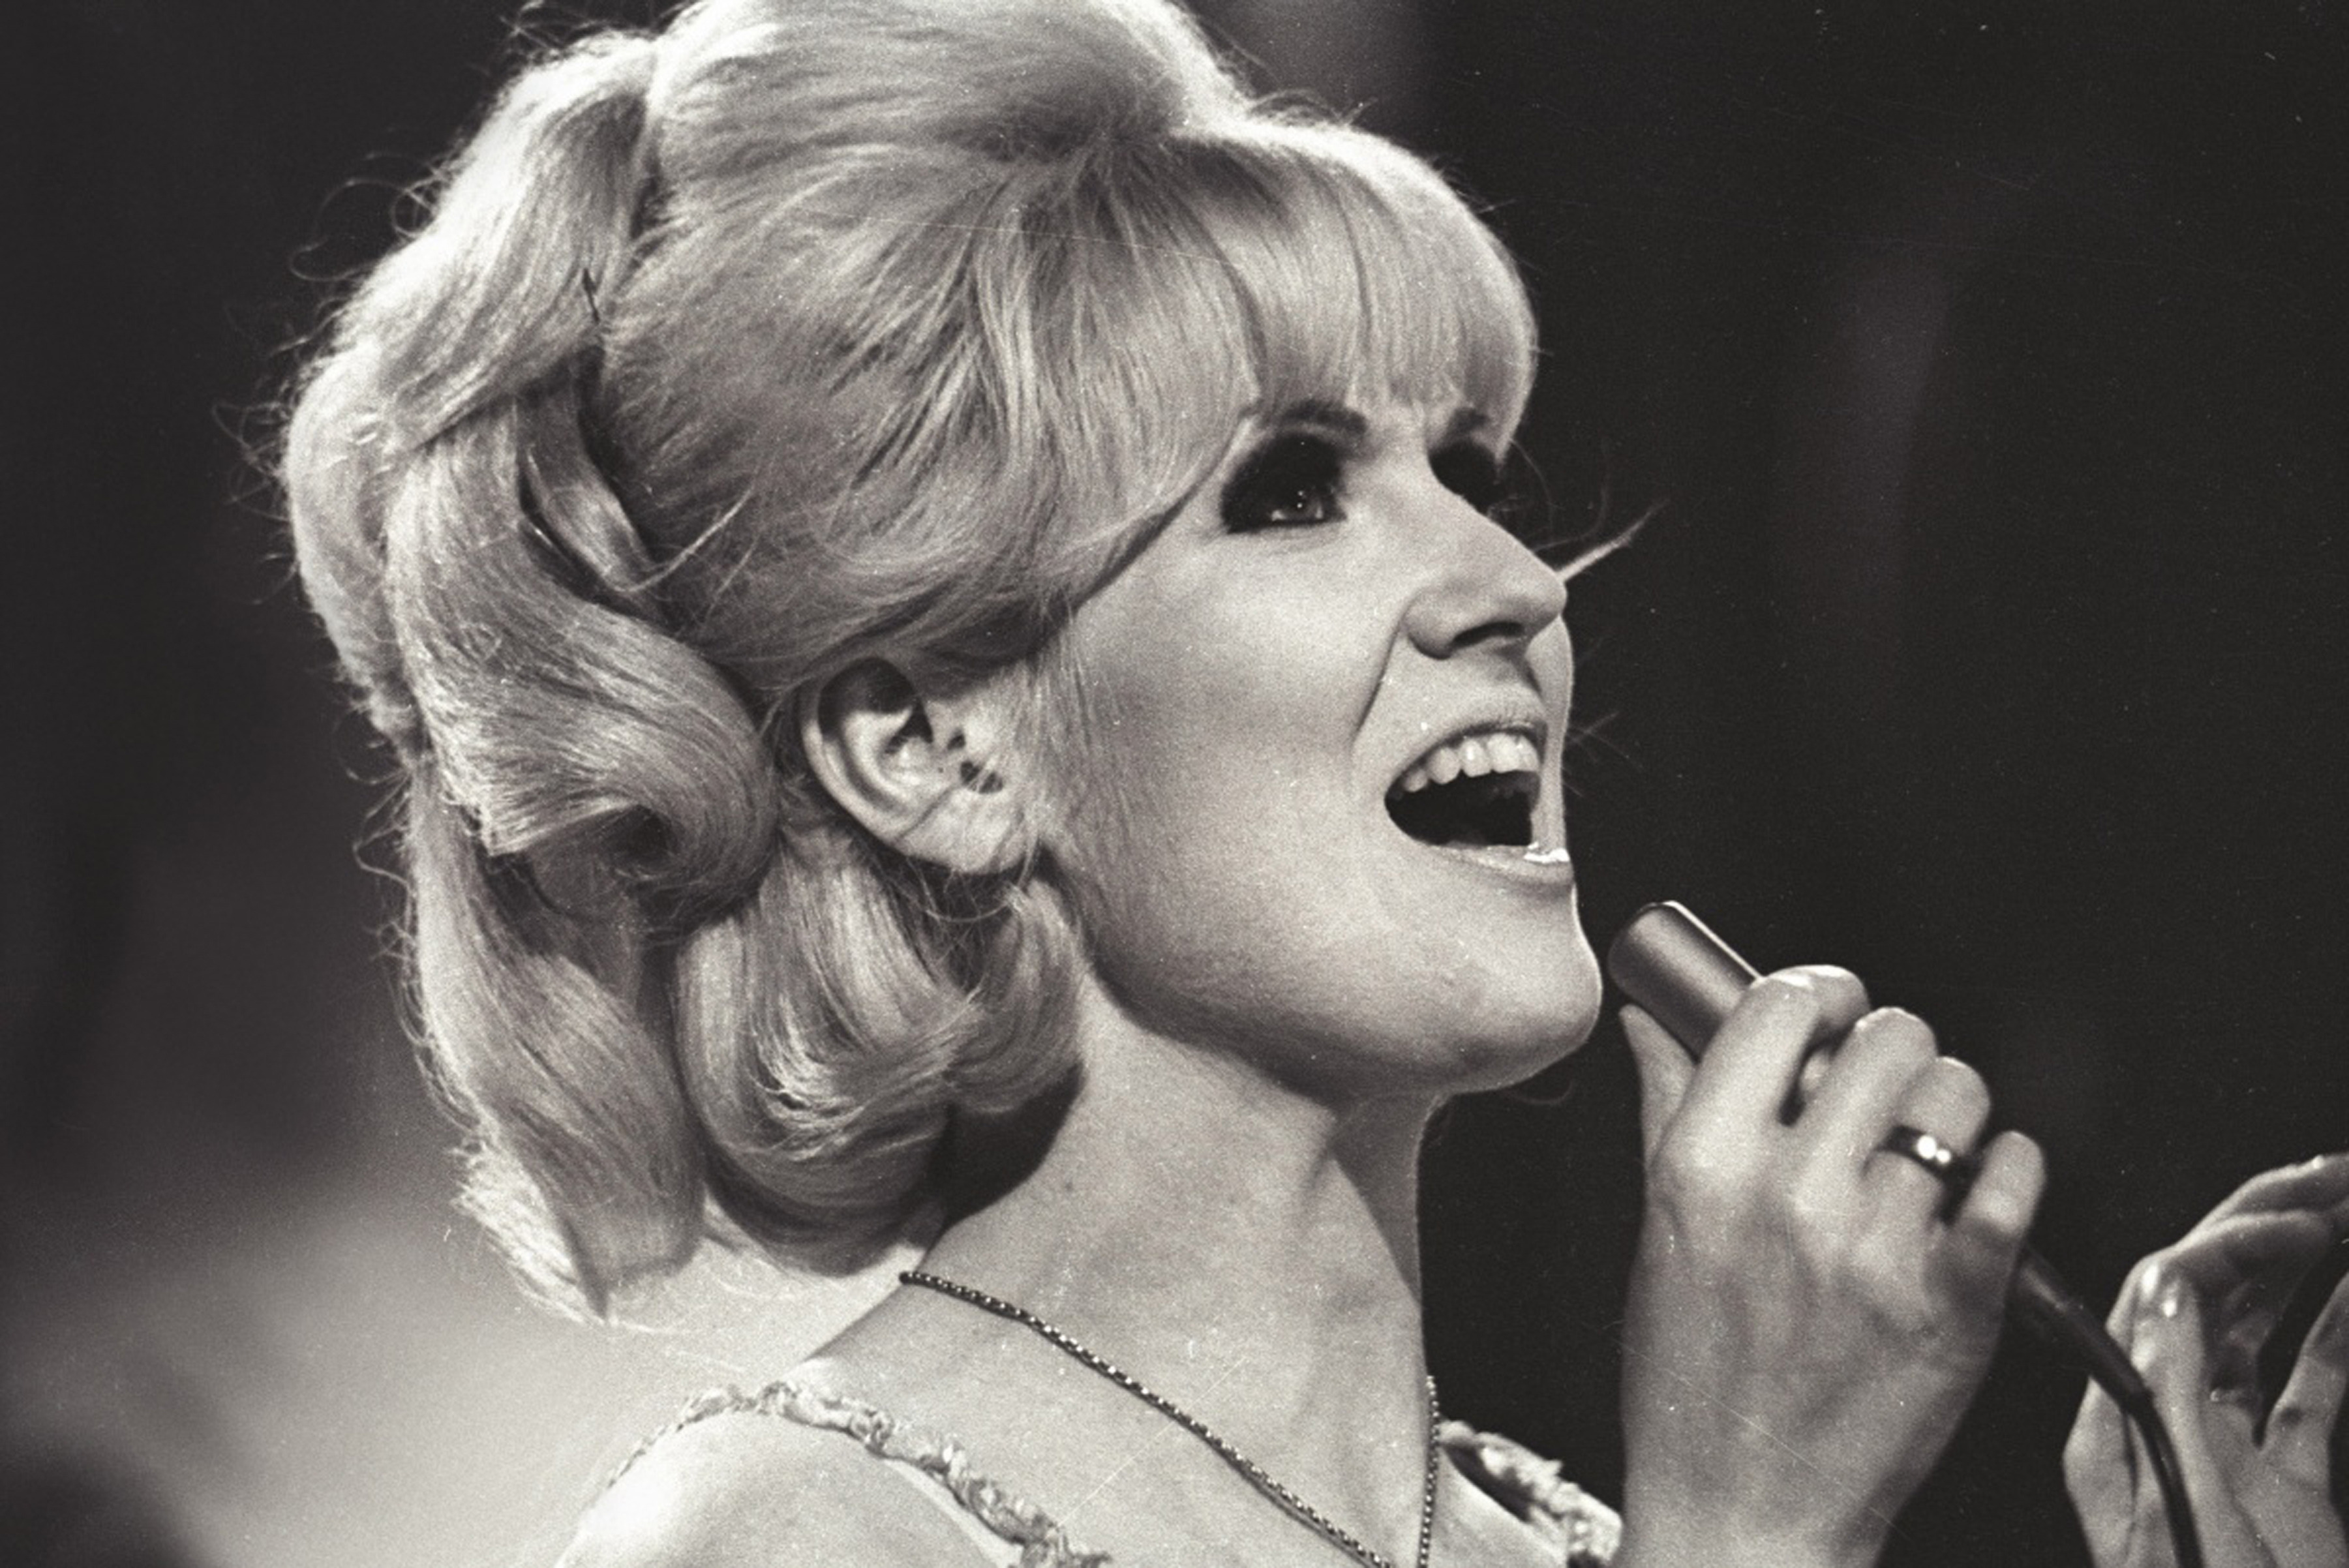 The life and childhood of the legend Dusty Springfield